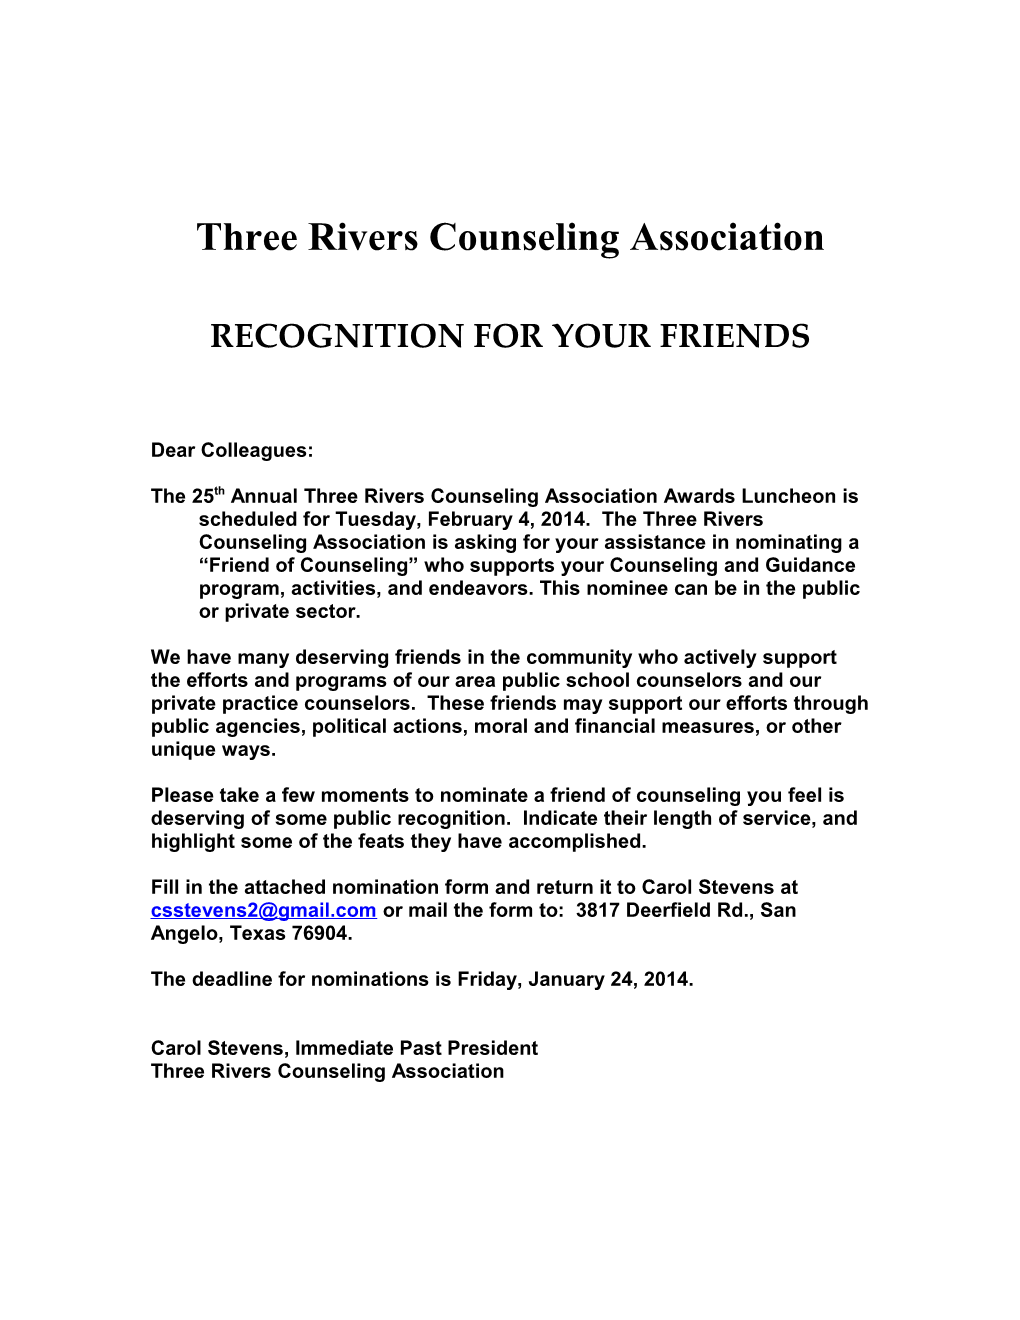 Three Rivers Counseling Association